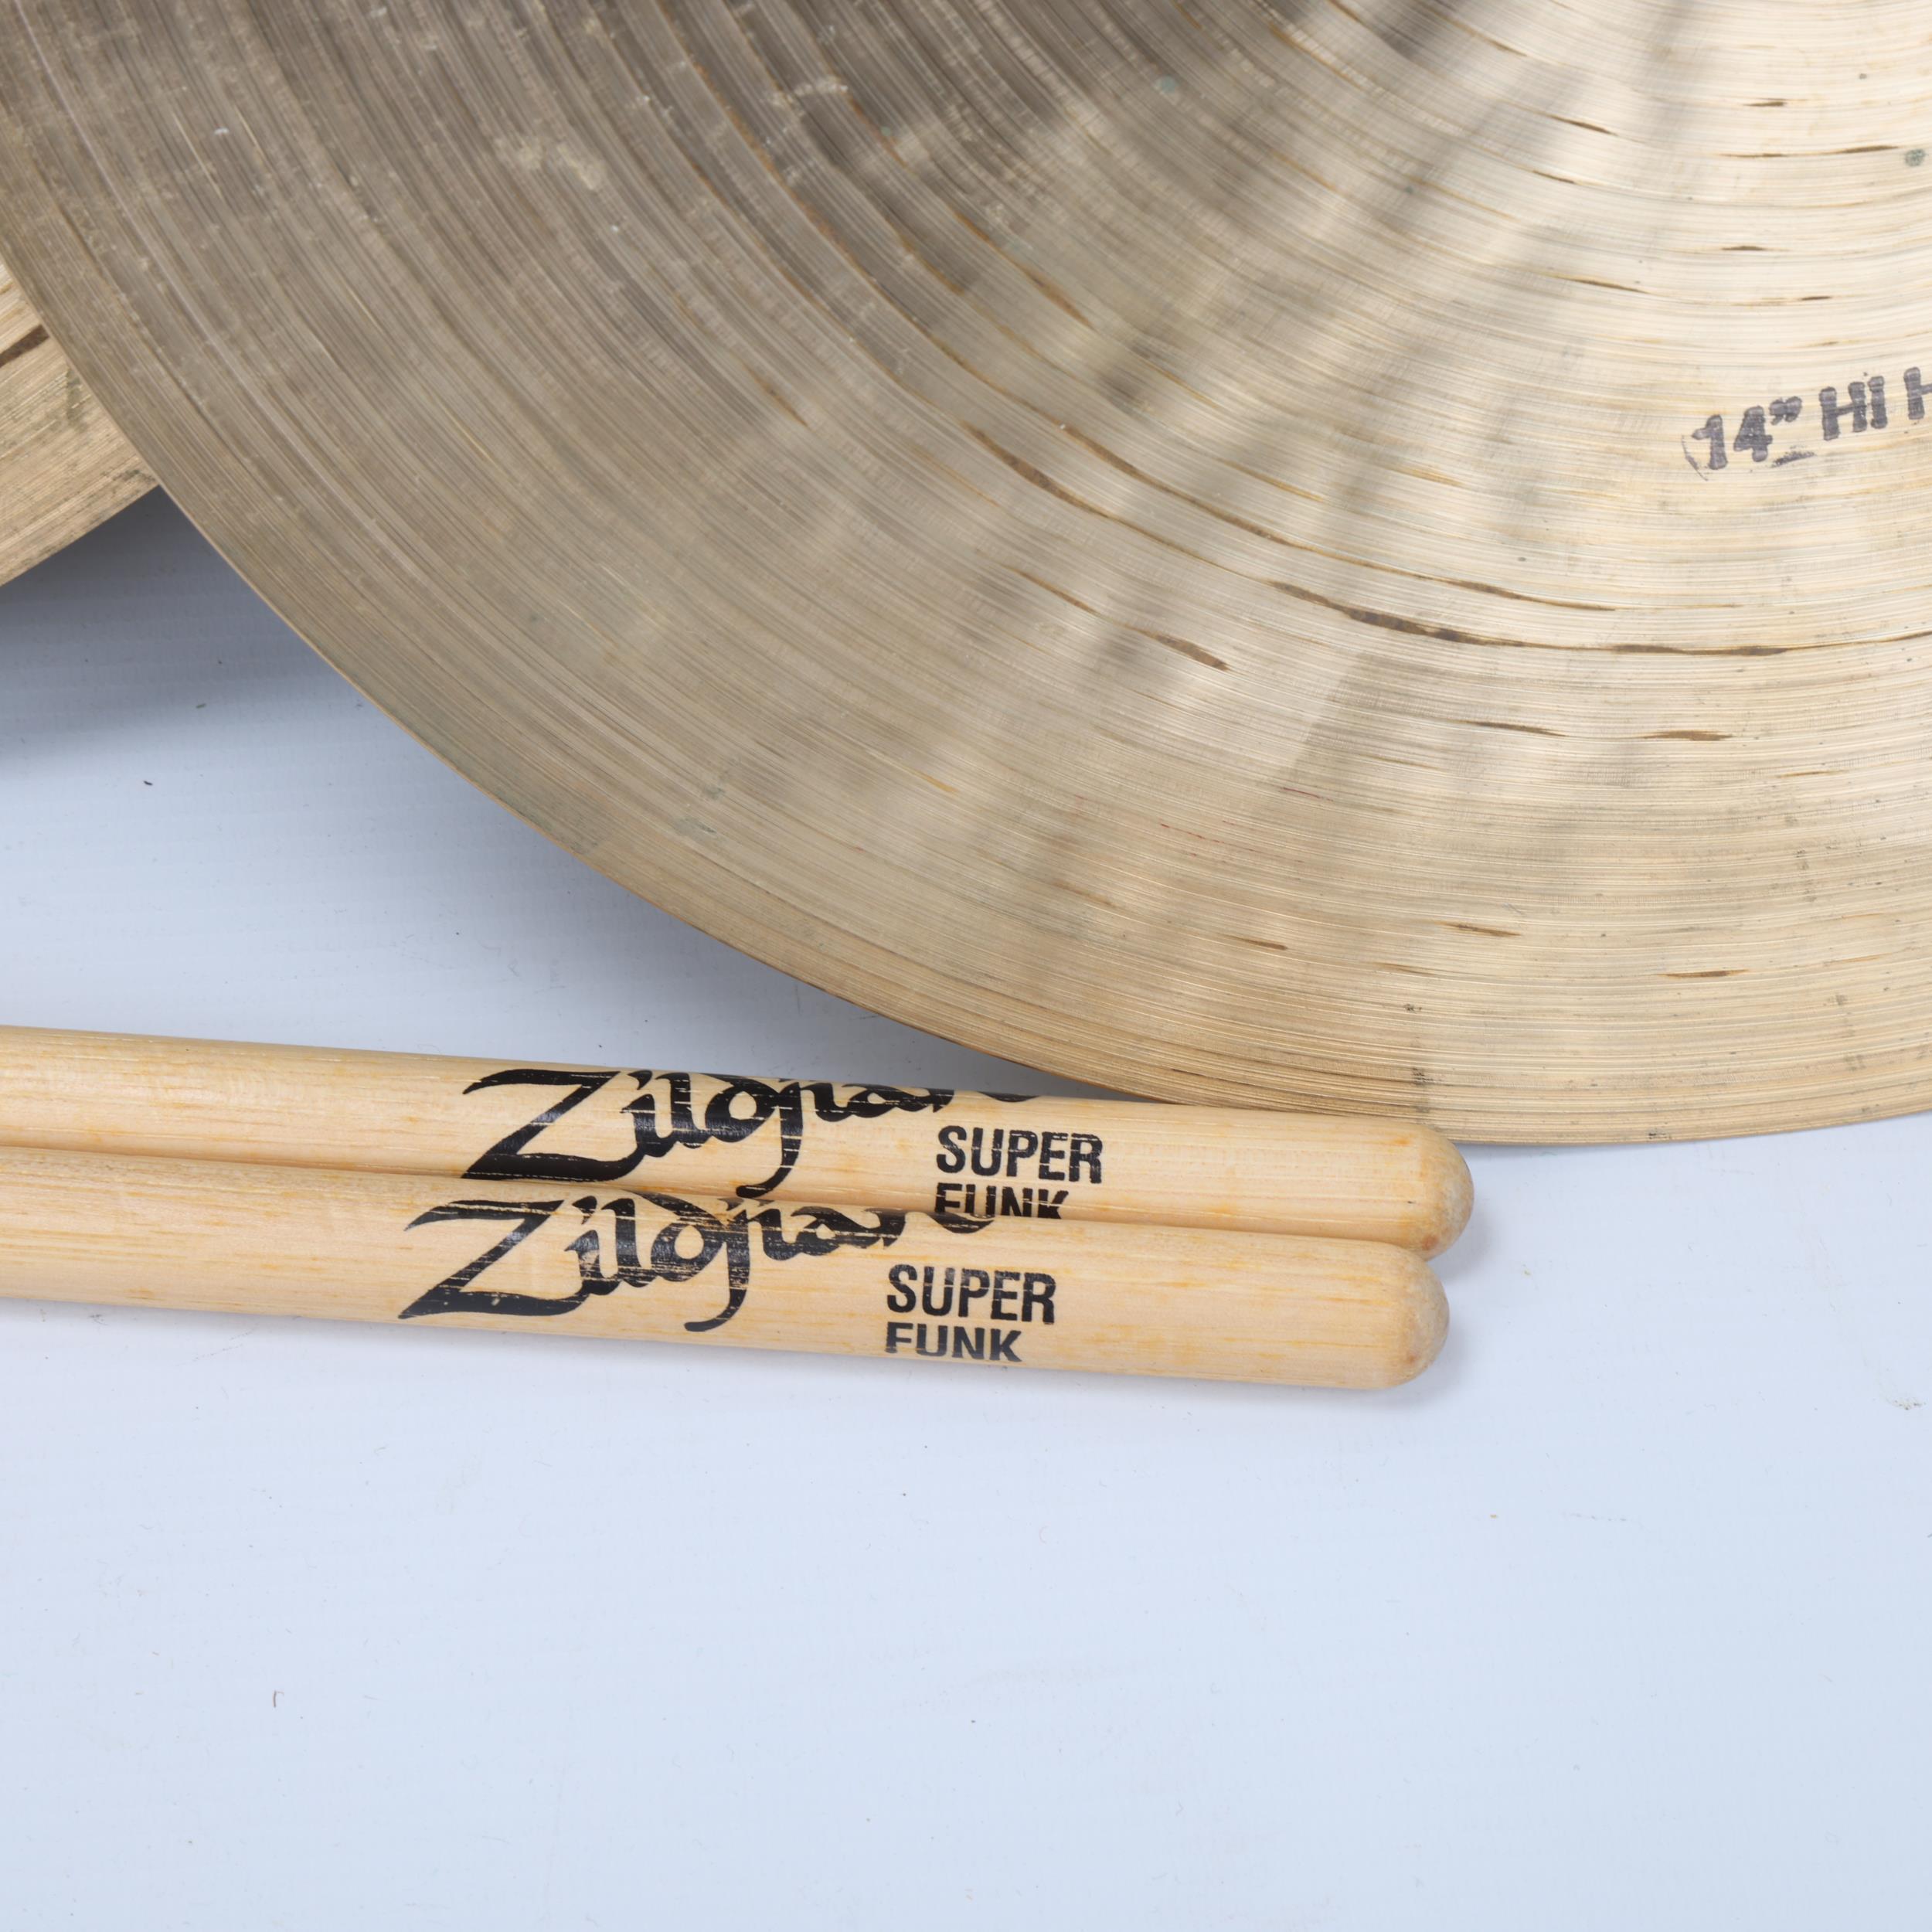 JIMI HENDRIX EXPERIENCE Zildjian Cymbals (2) Owned by drummer MITCH MITCHELL. One 14inch Hi Hat - Image 2 of 3